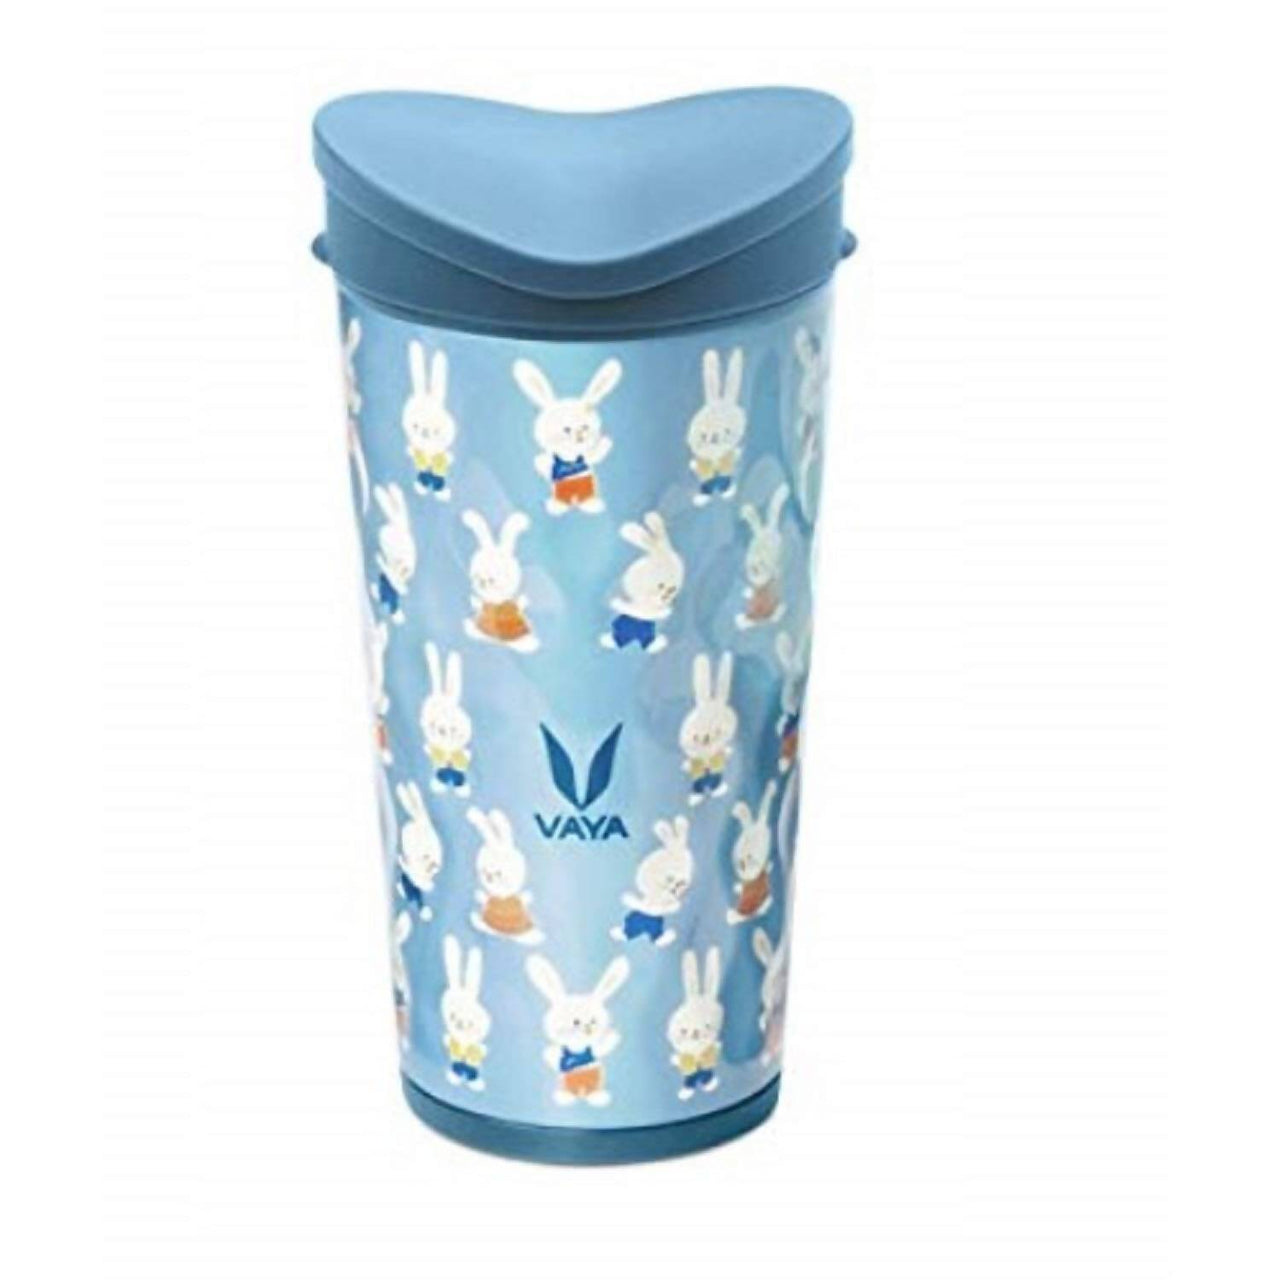 Vaya Drynk Stainless Steel Strawless Silicone Bunnies Print Spout Tumbler With Spill-Proof Pediasafe Lid - 350ml (Blue) - Distacart